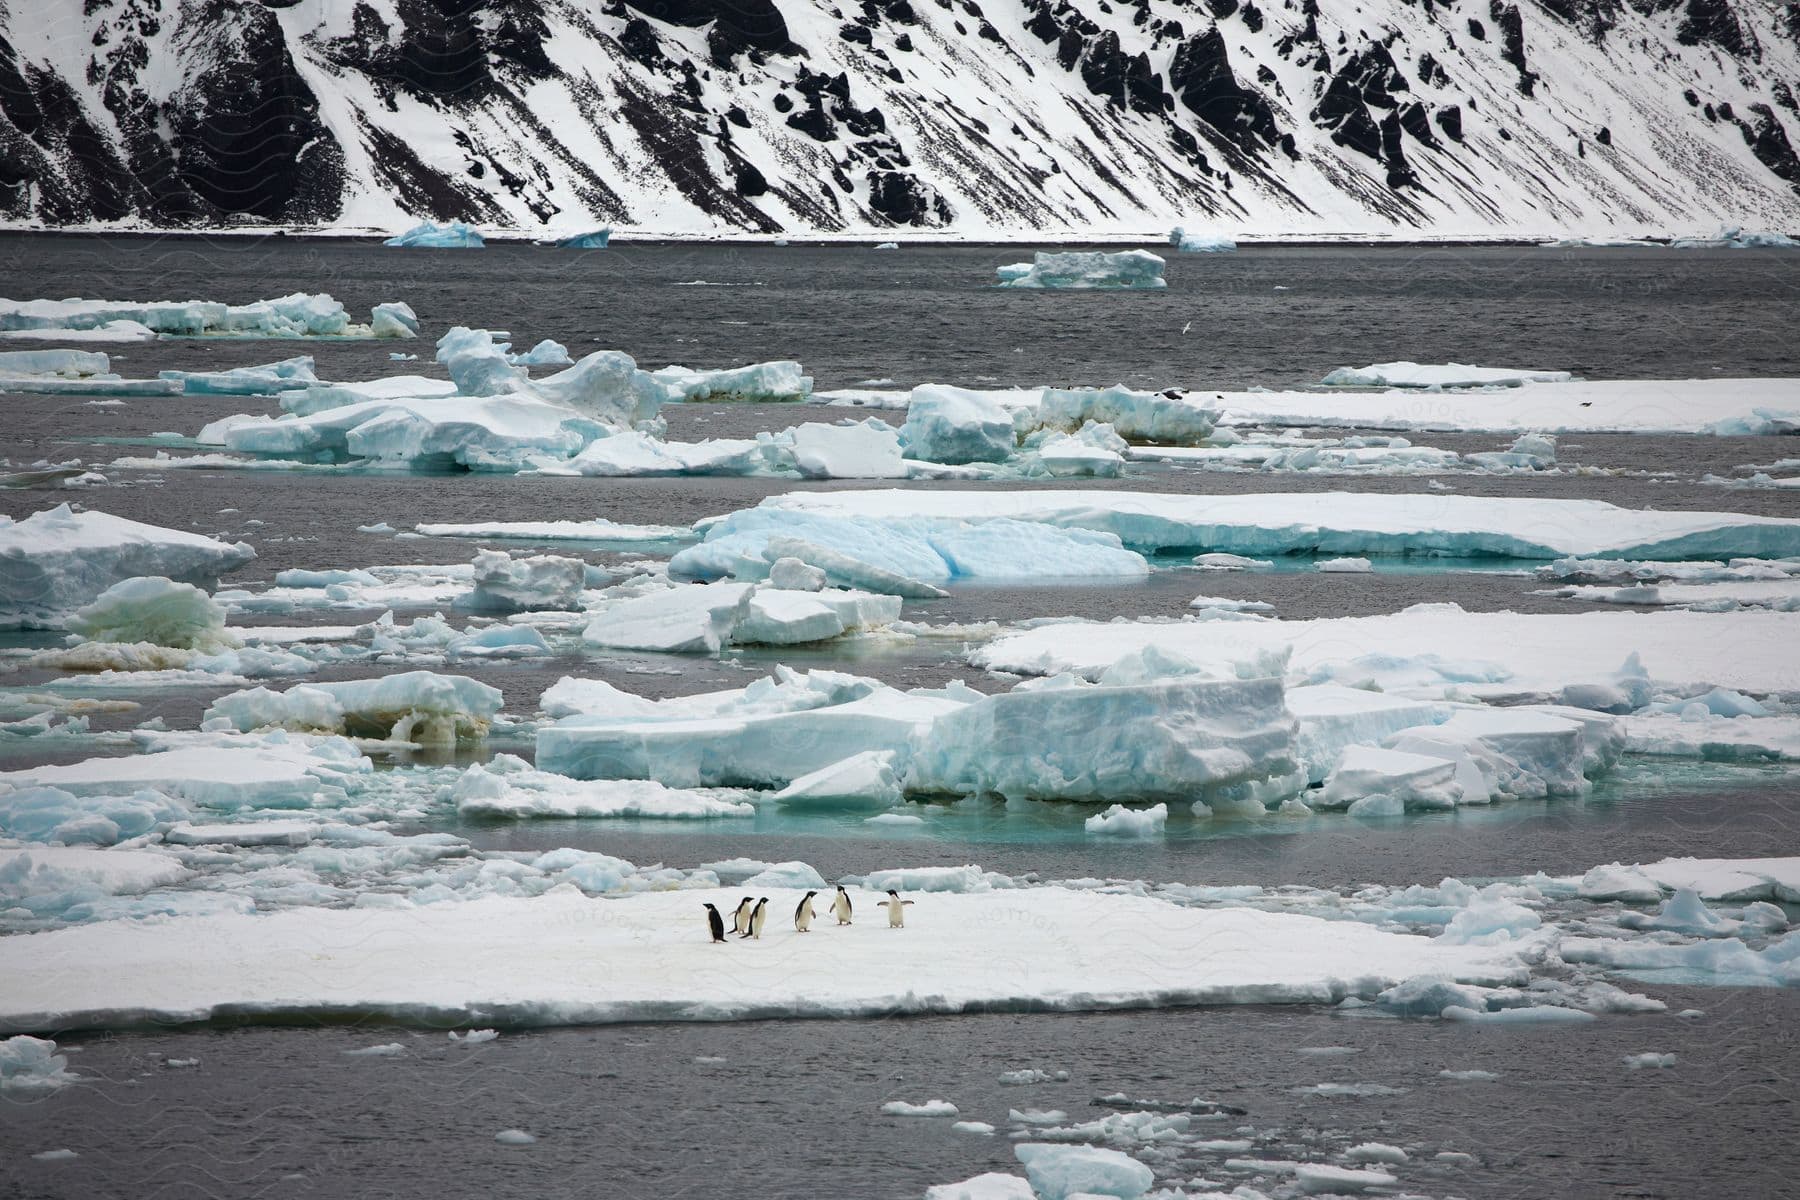 Penguins standing on a block of ice in the middle of the ocean